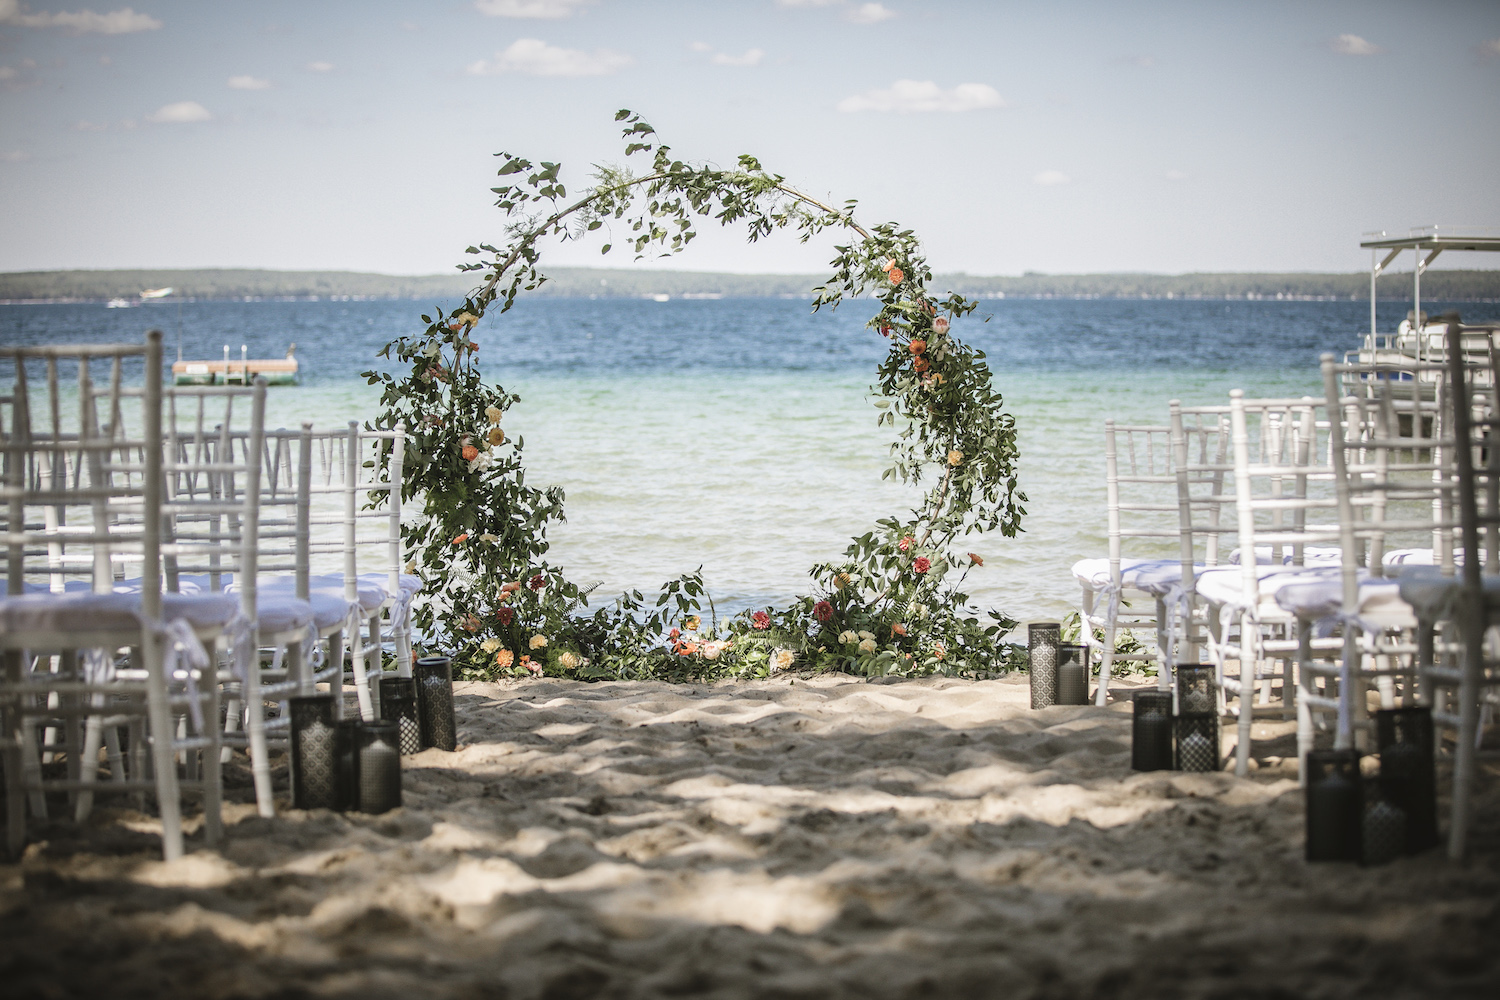 Ceremony lakeside with floral hoop